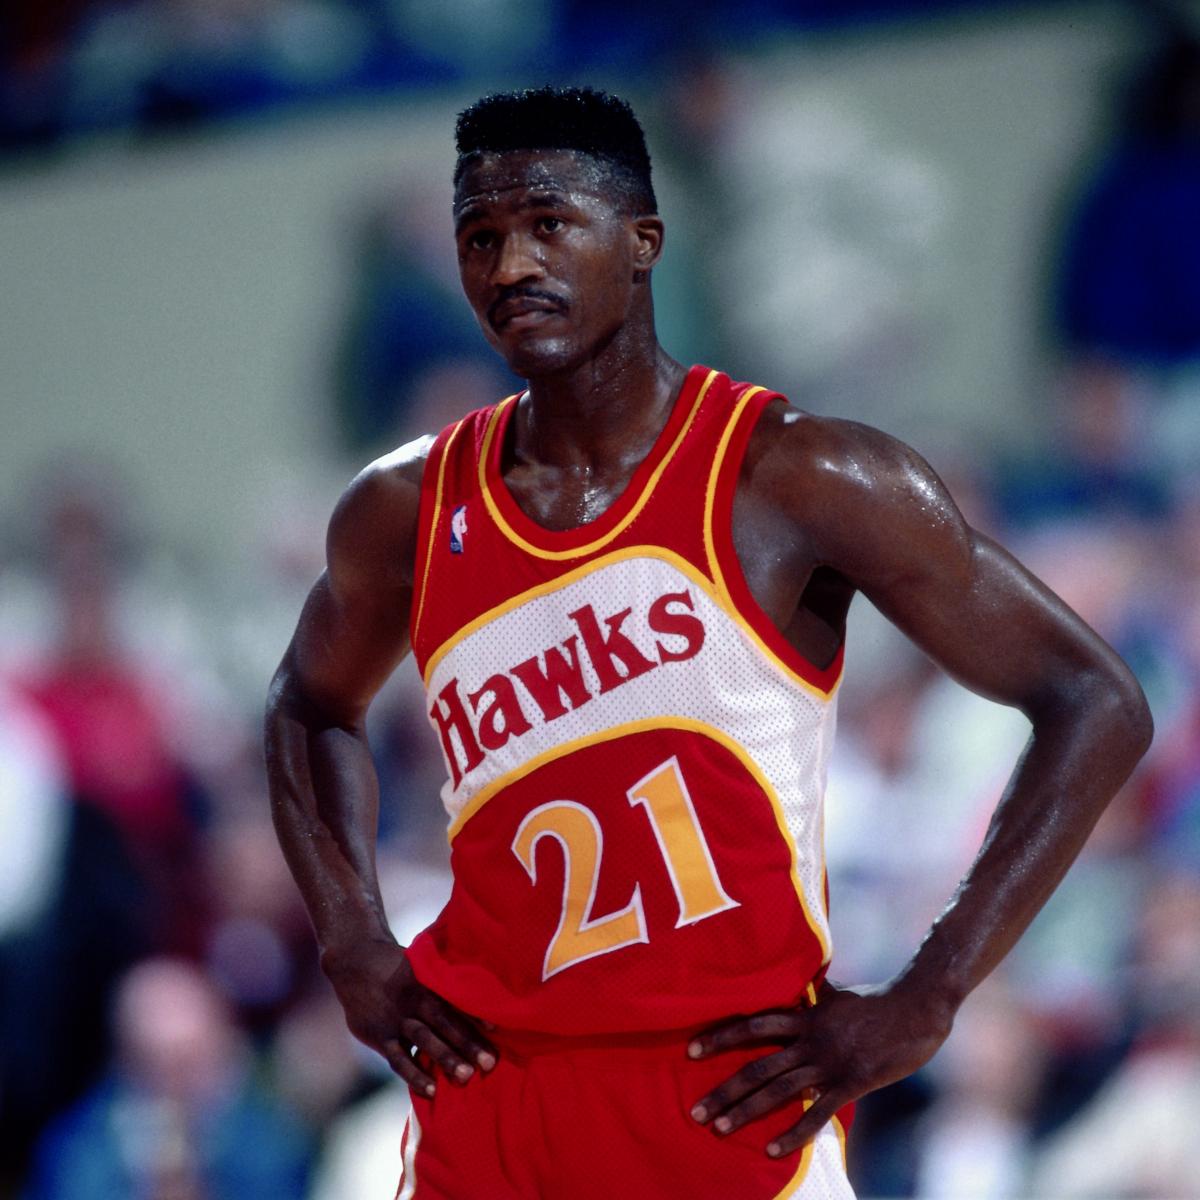 Remember When the Atlanta Hawks Wore Mismatched Jerseys?